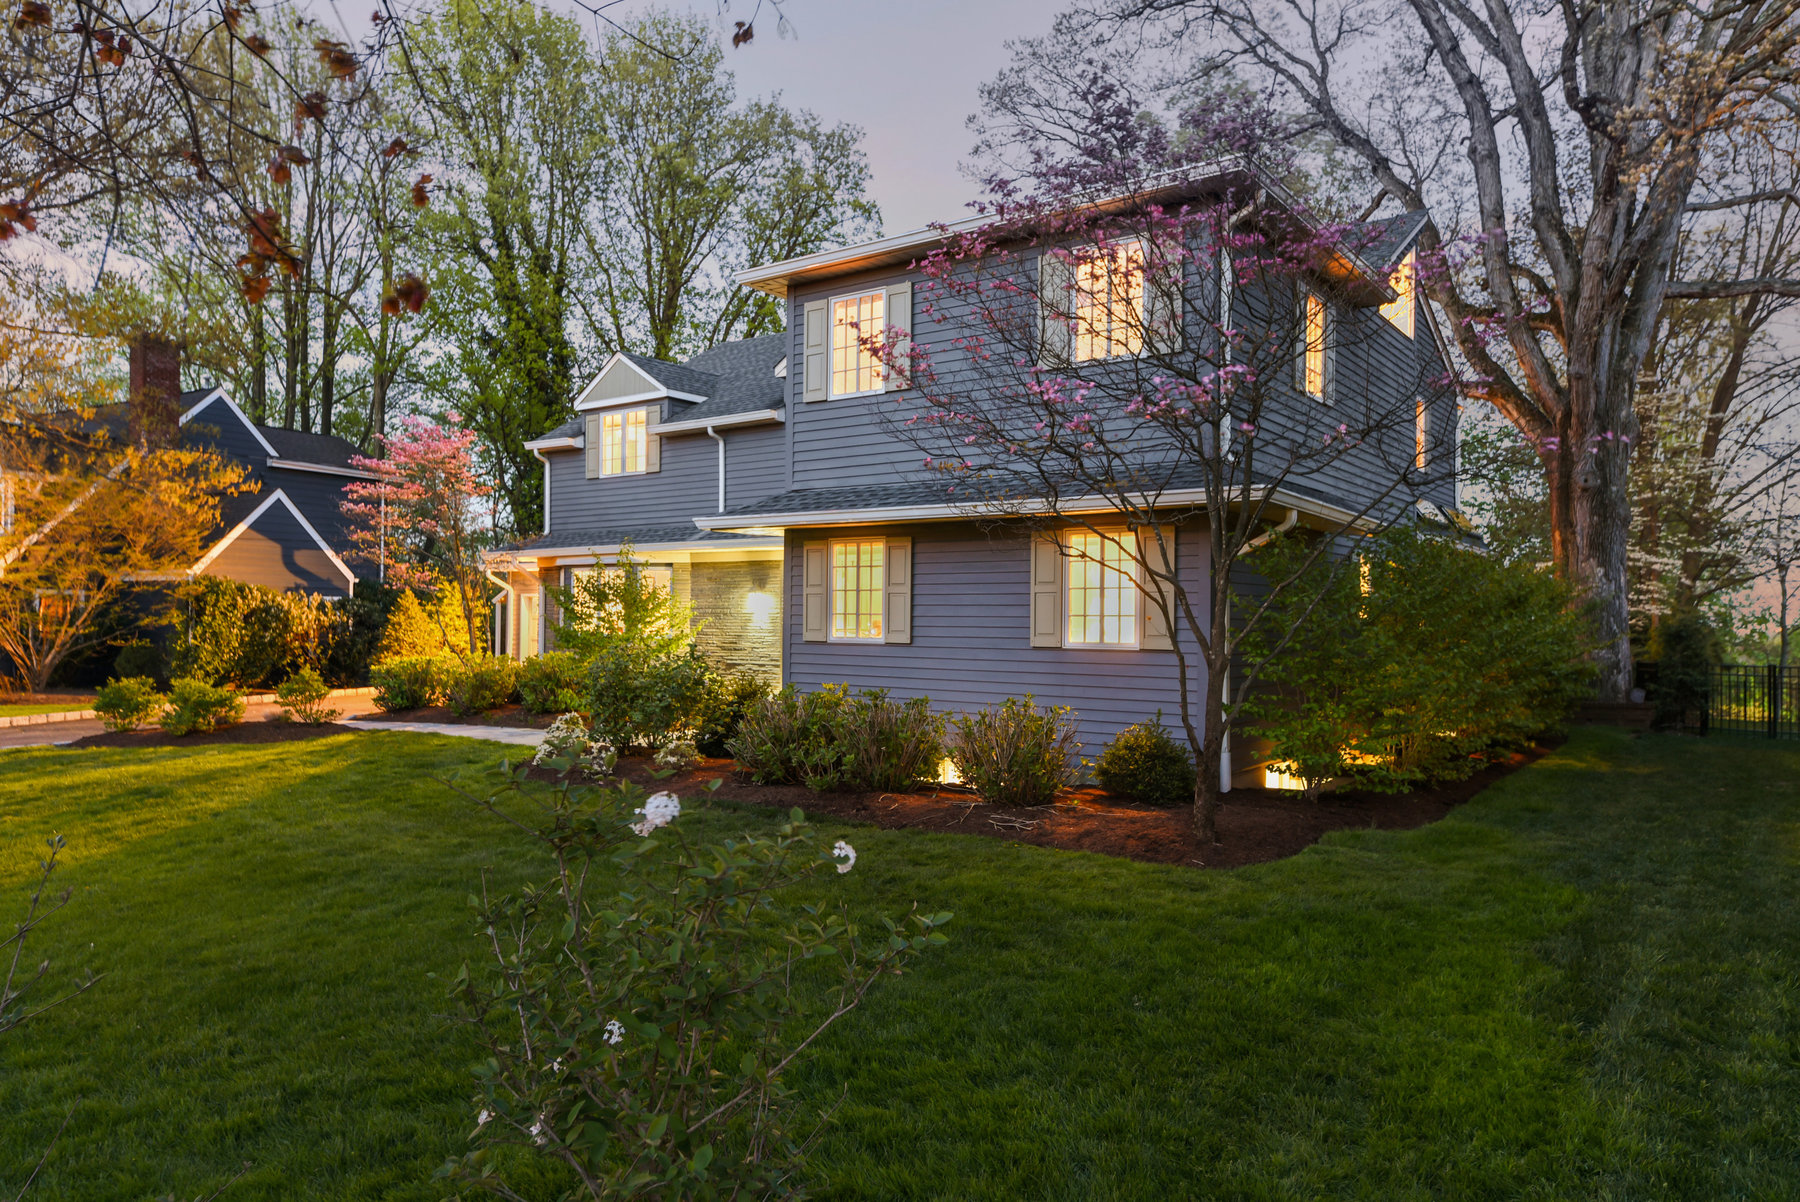 274 Forest Drive, Short Hills - Front angle at dusk